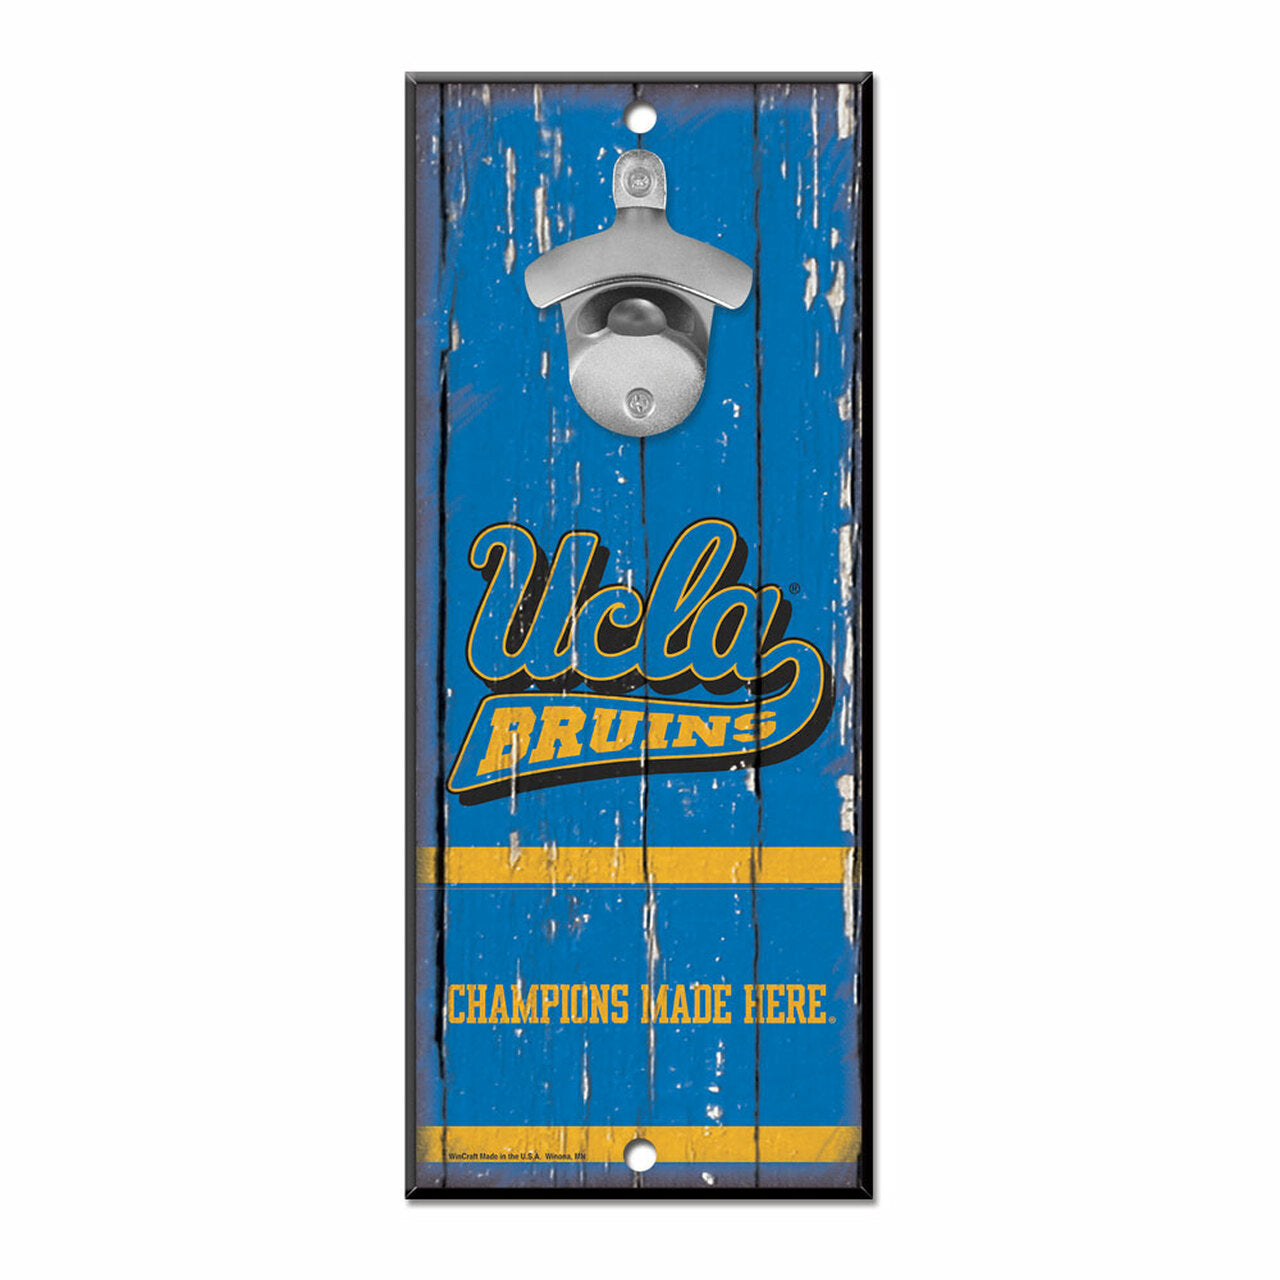 UCLA Bruins 5" x 11" Bottle Opener Wood Sign by Wincraft